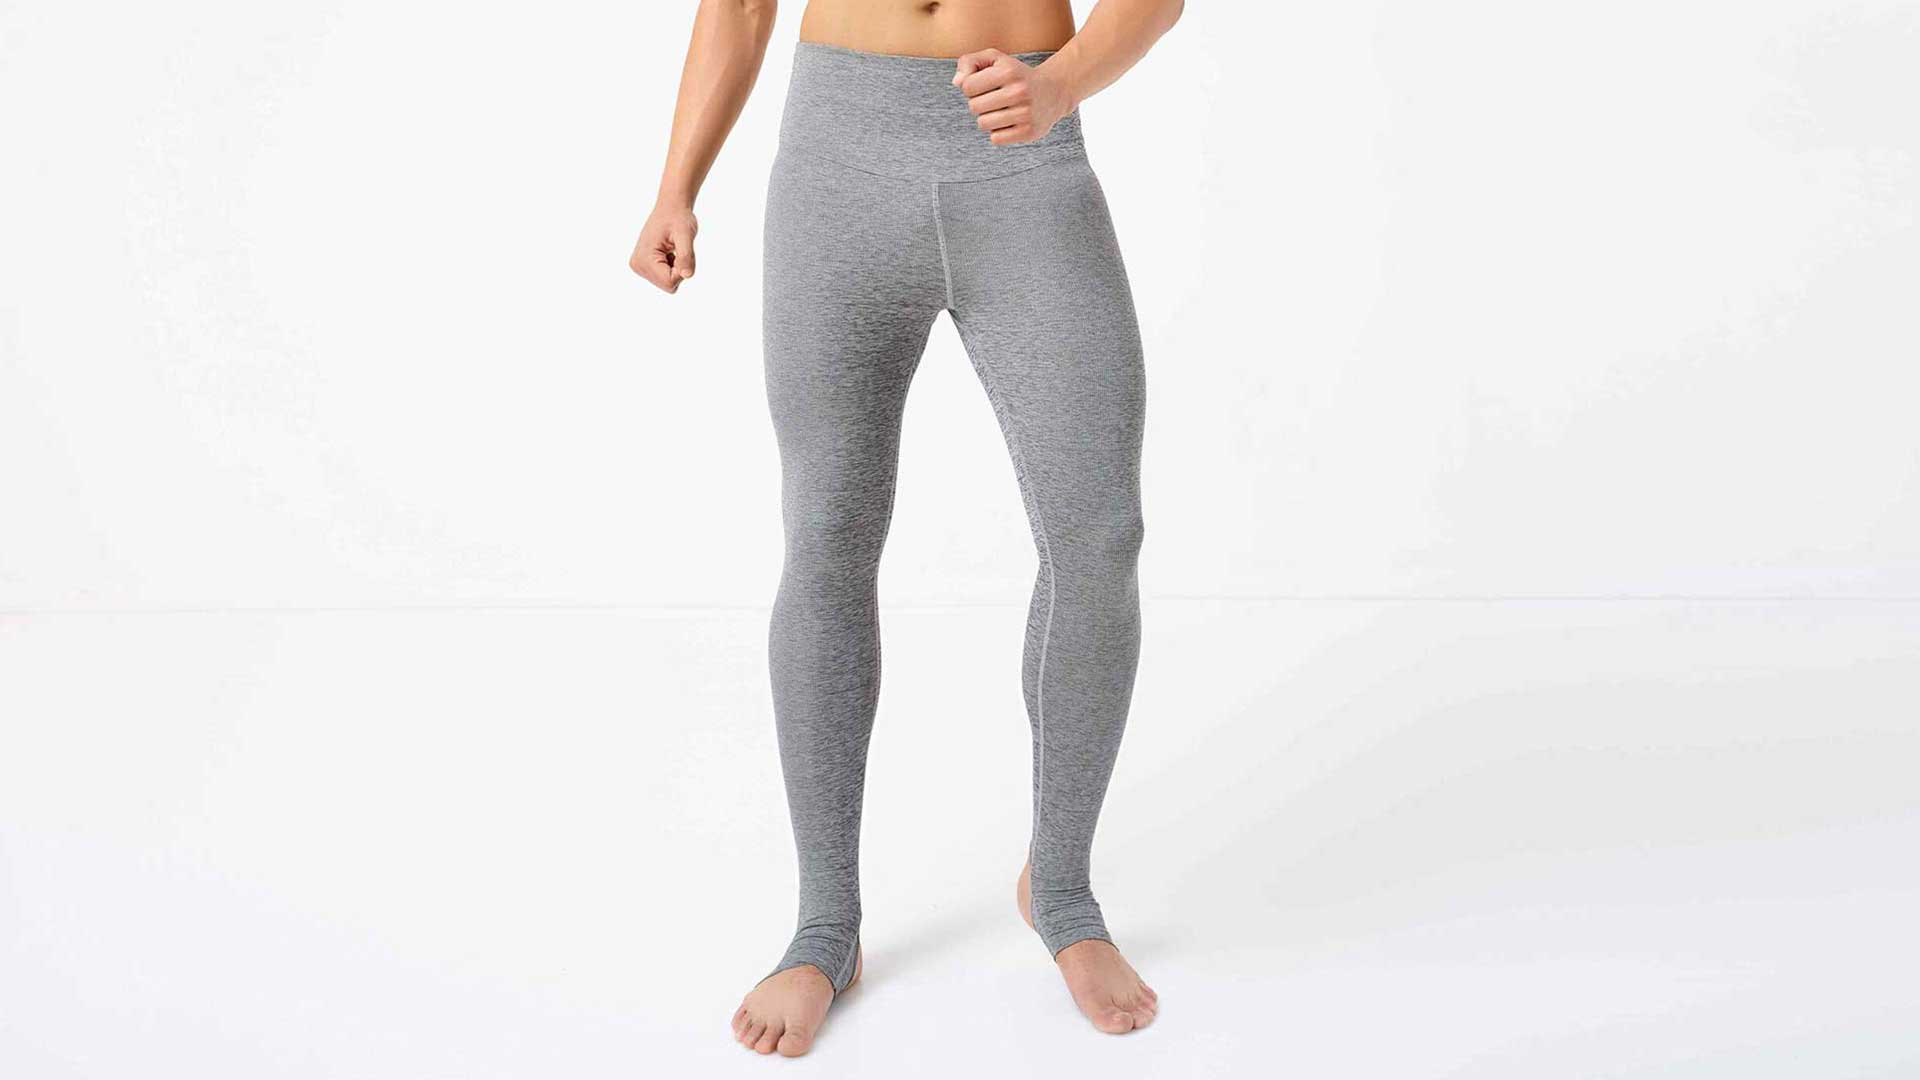 Compression recovery leggings